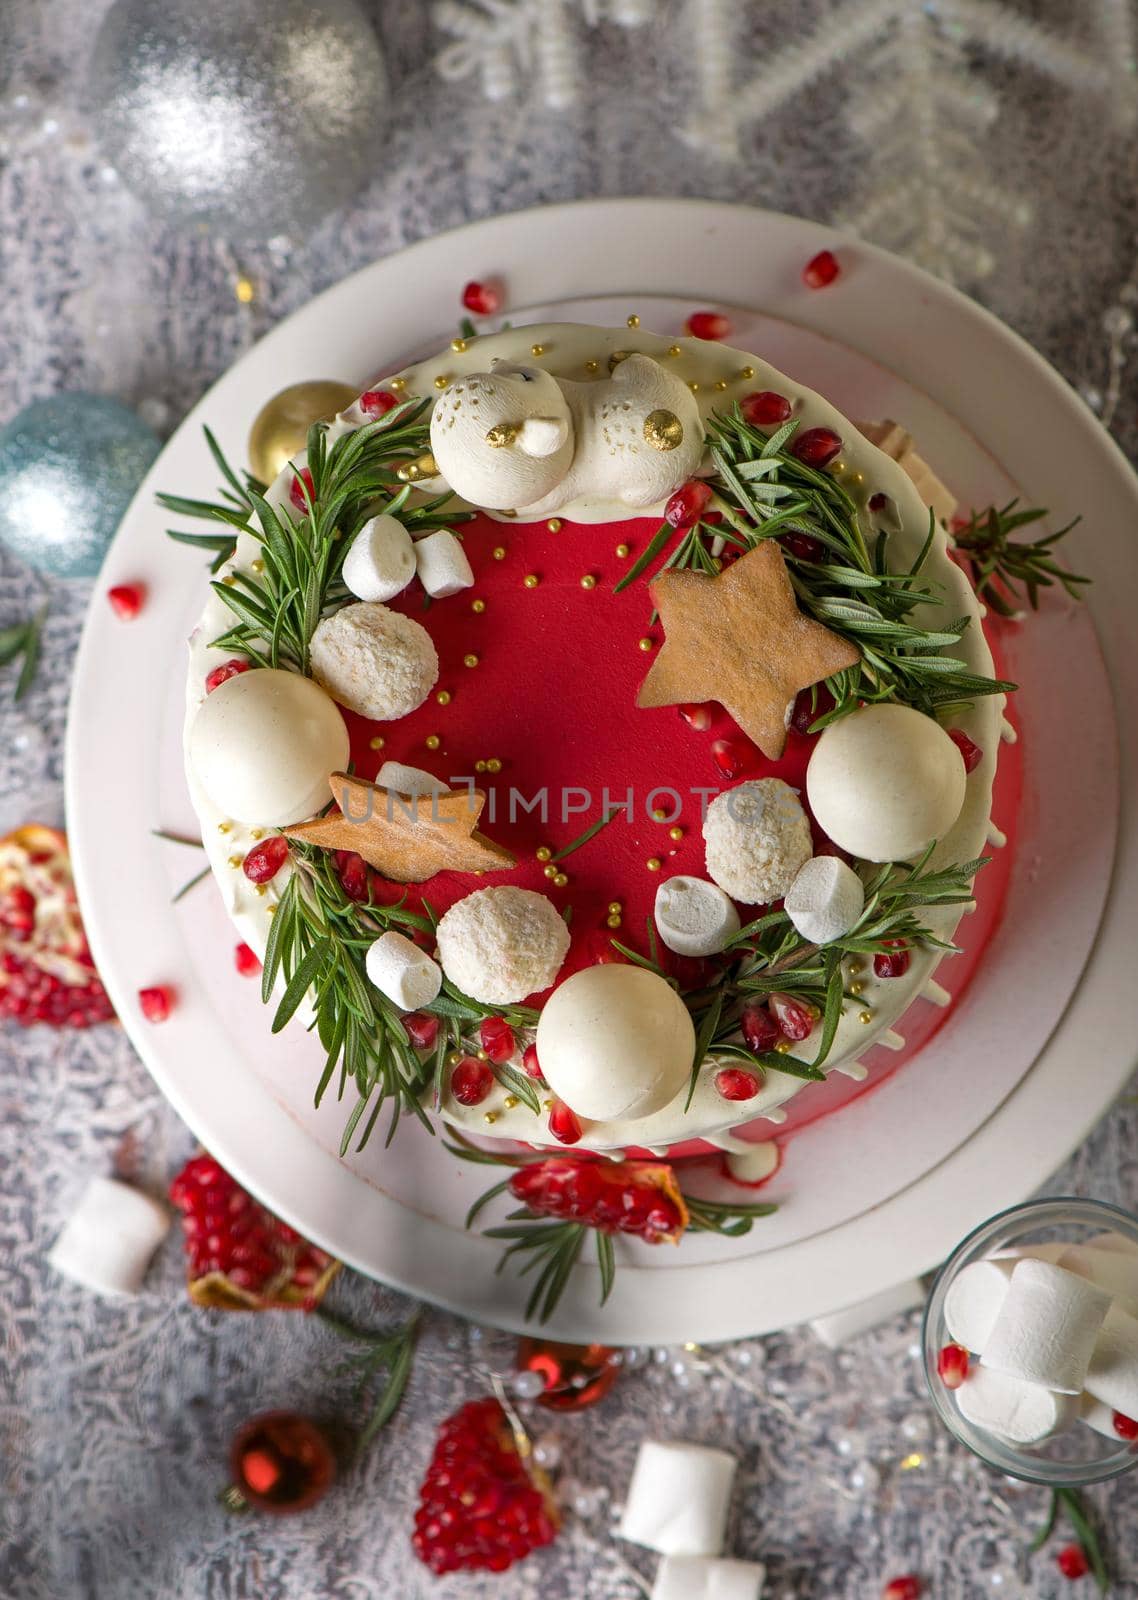 2021 is the year of the bull. Christmas or New Year decorated cake with cream cheese by aprilphoto